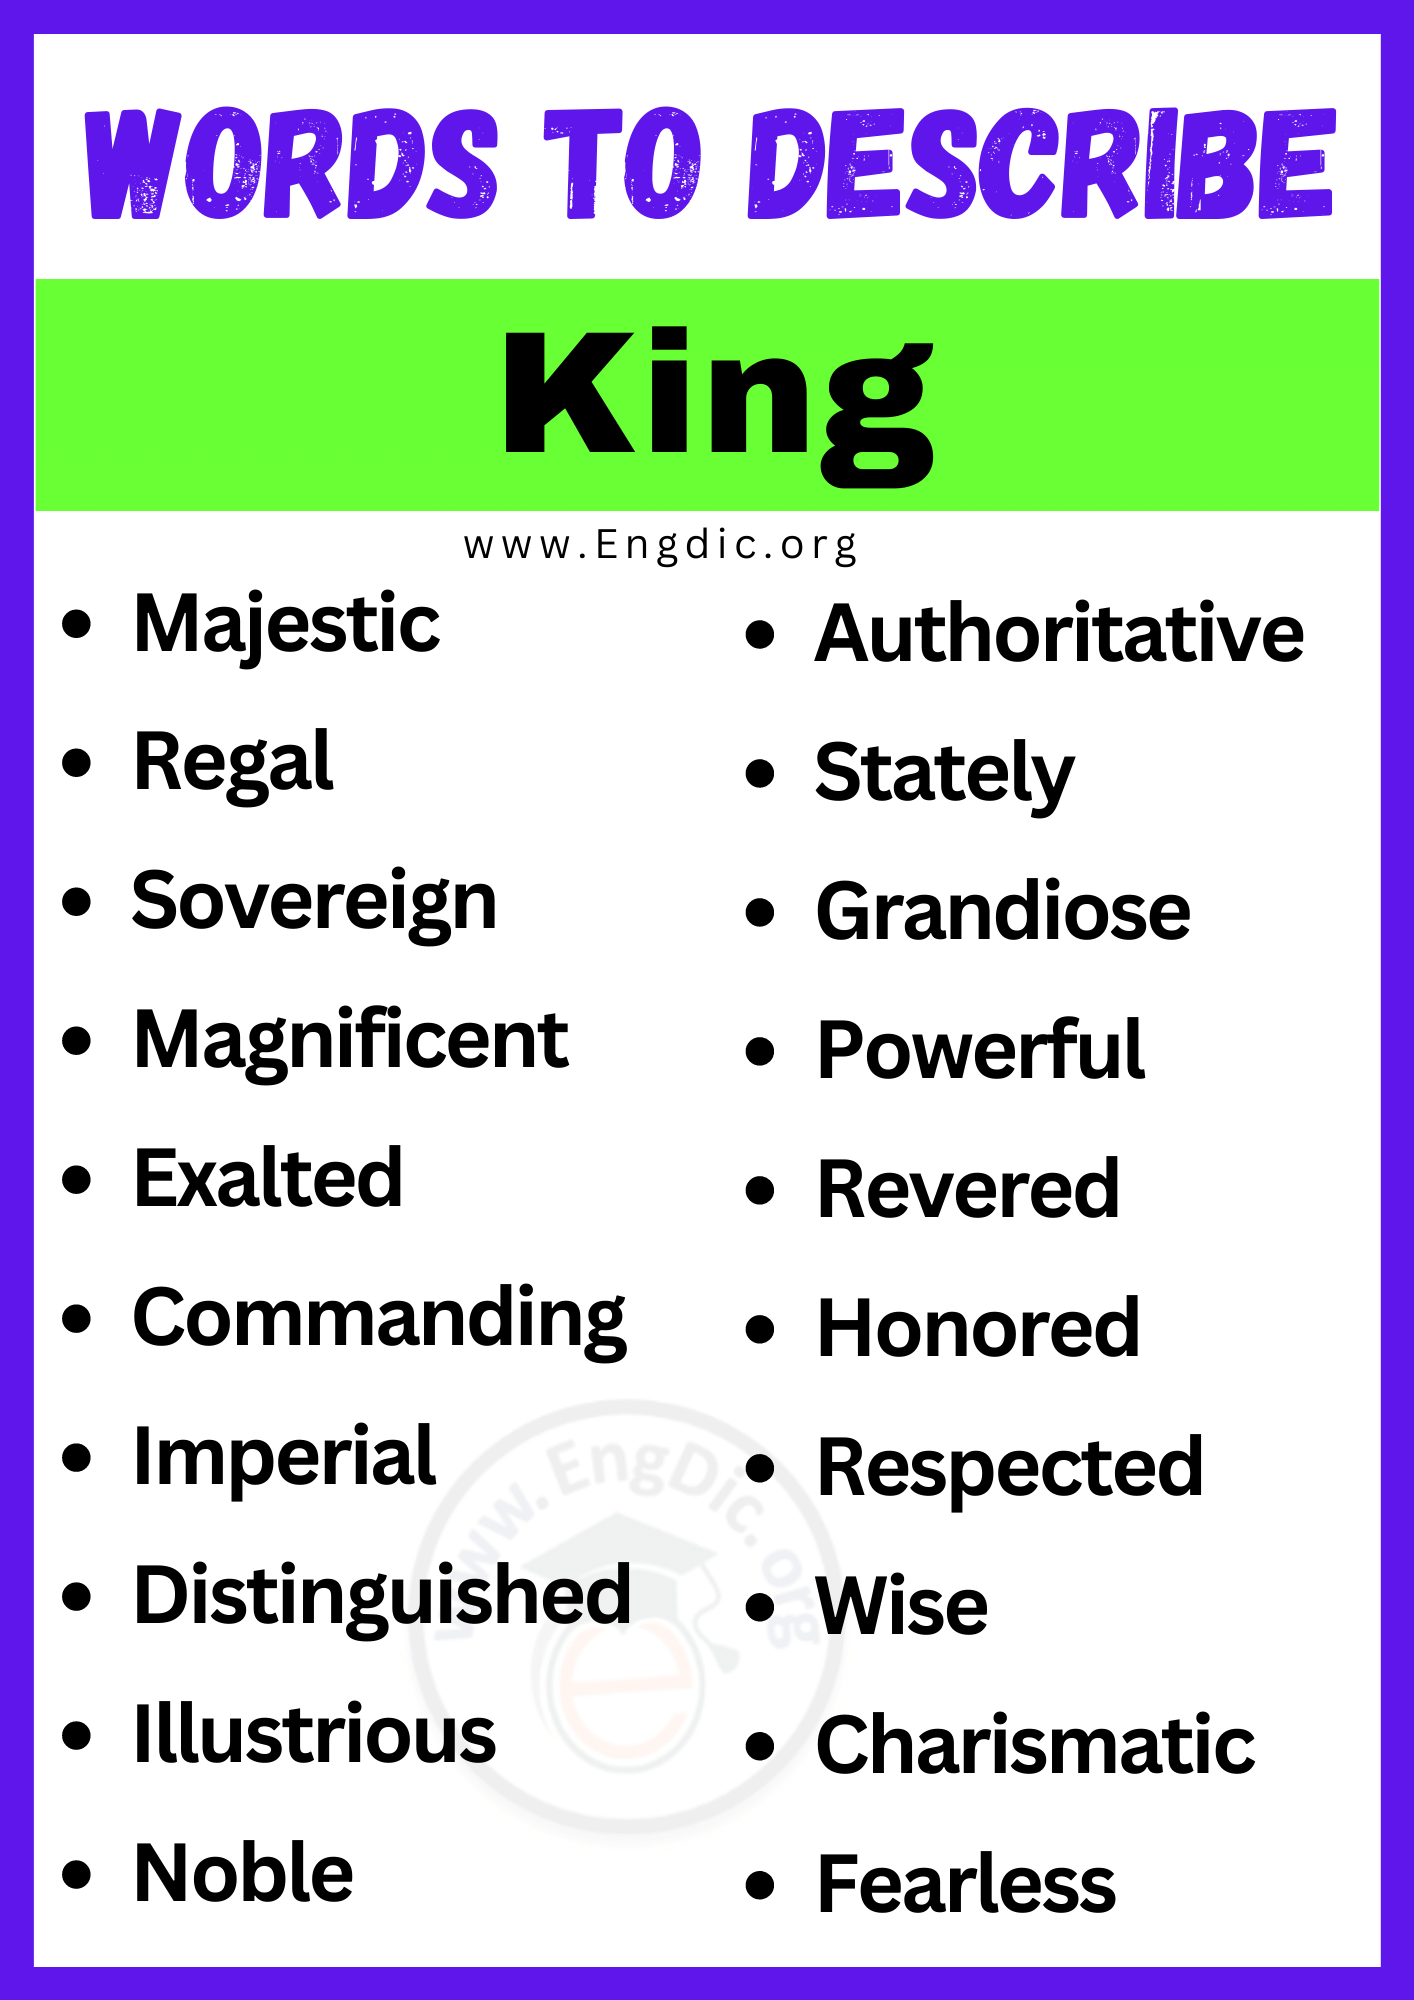 Words to Describe King